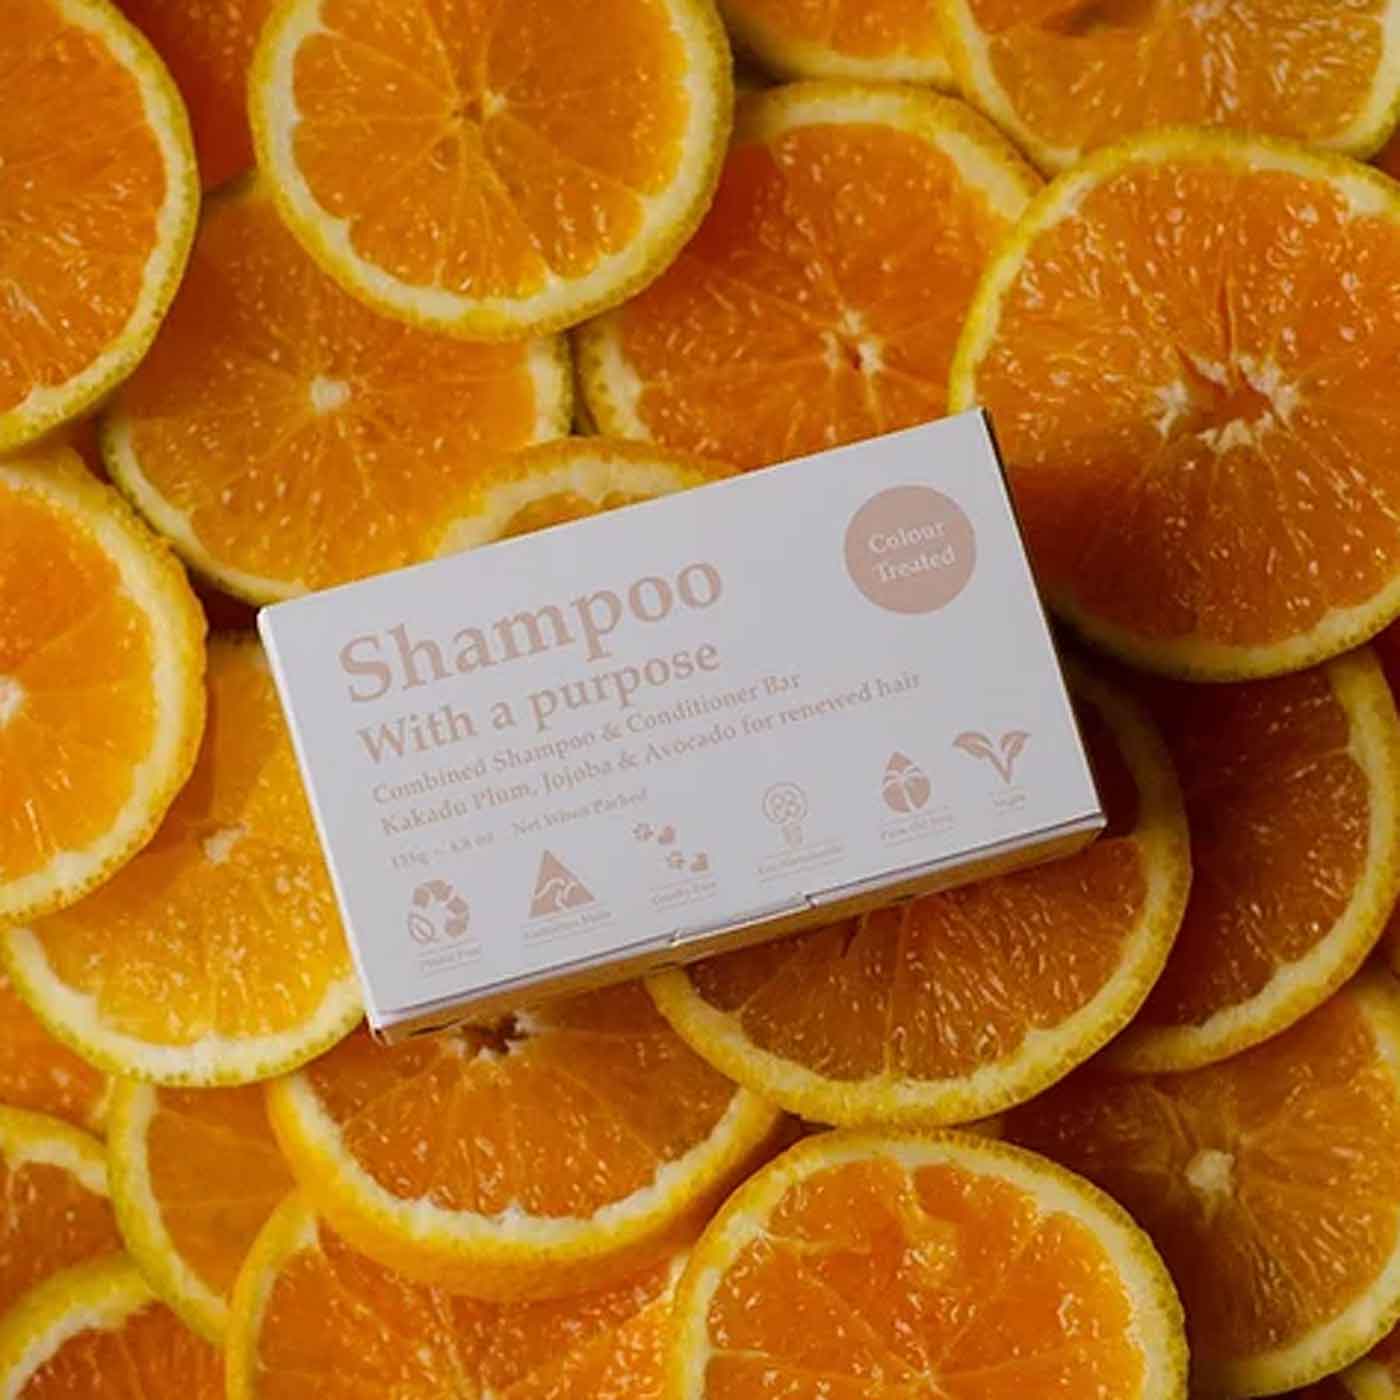 Shampoo with a purpose shampoo and conditioner bar. All natural, vegan & cruelty-free. Diminish